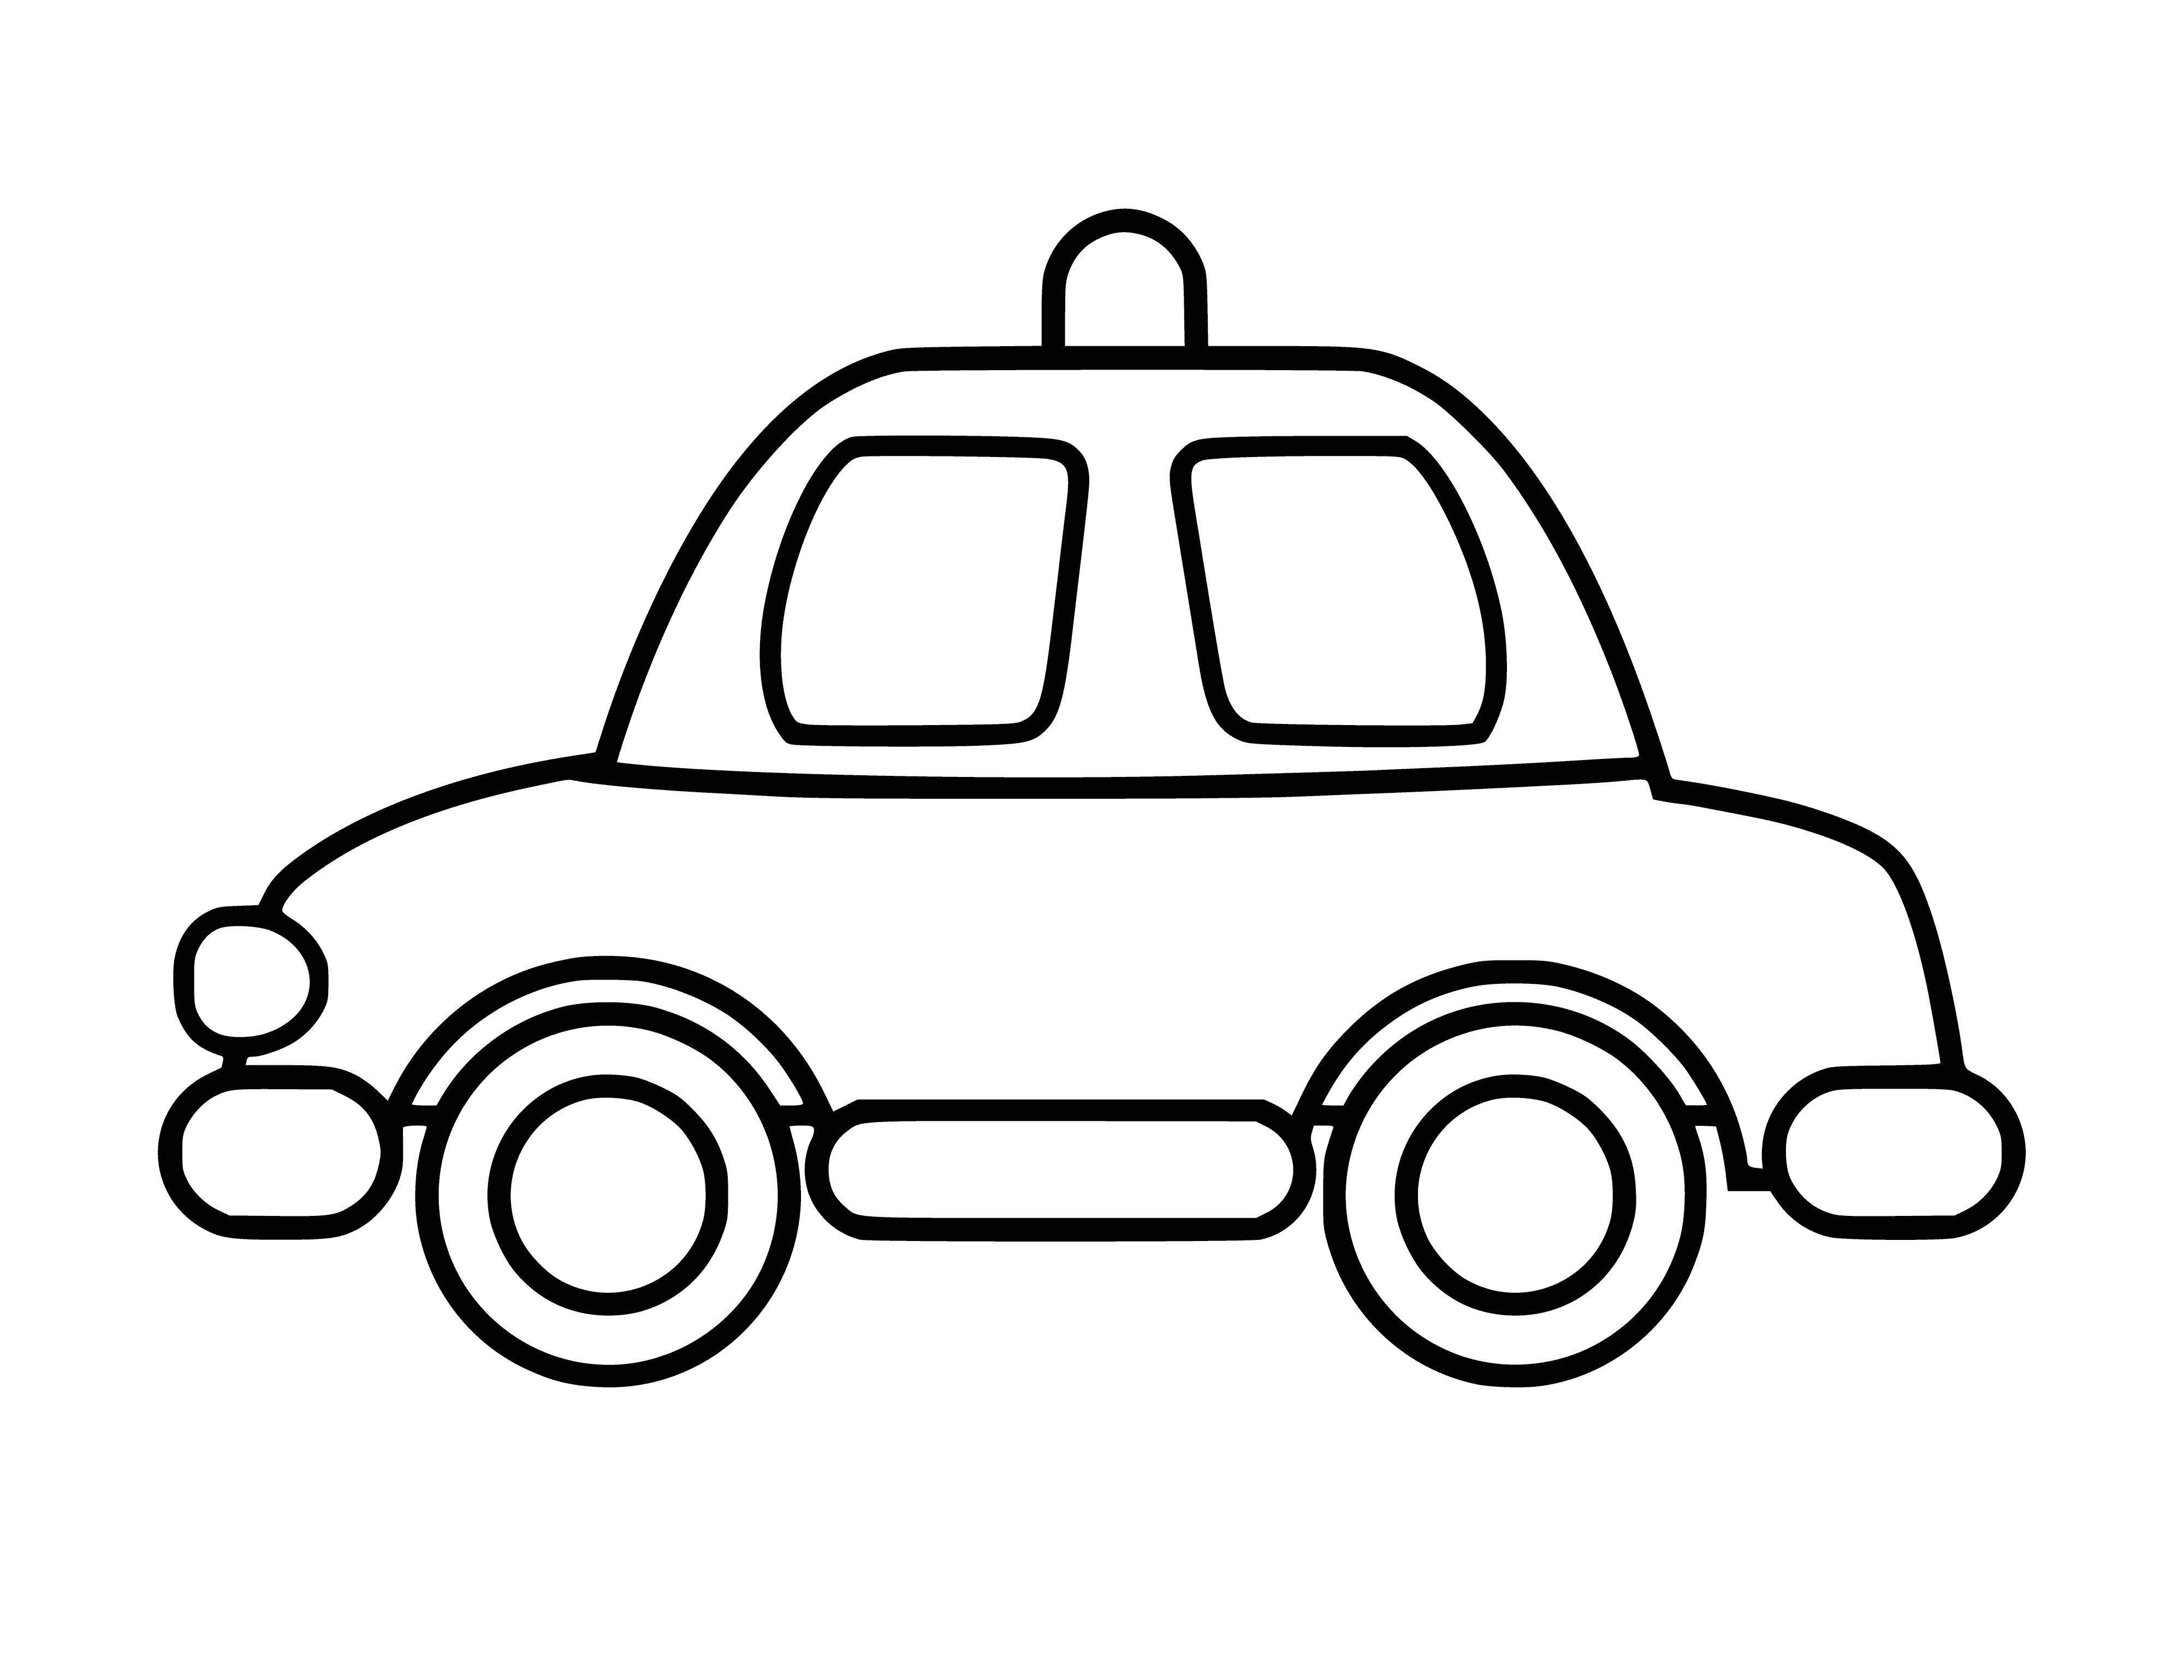 coloring page: A blue car drives down a city street, sunlight in the sky and trees looking green.